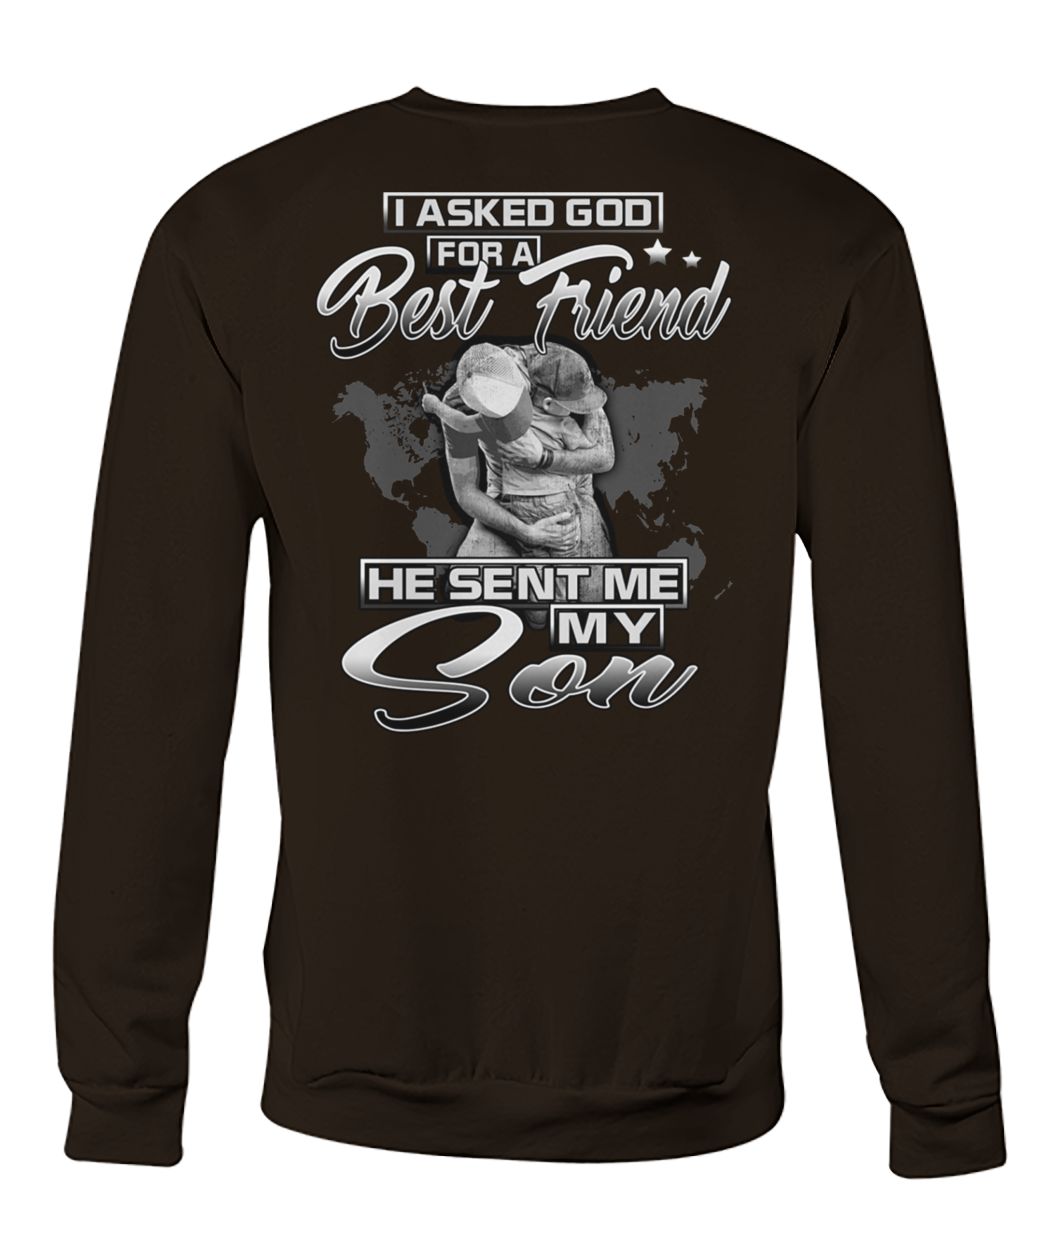 I asked god for a best friend he sent me my son crew neck sweatshirt